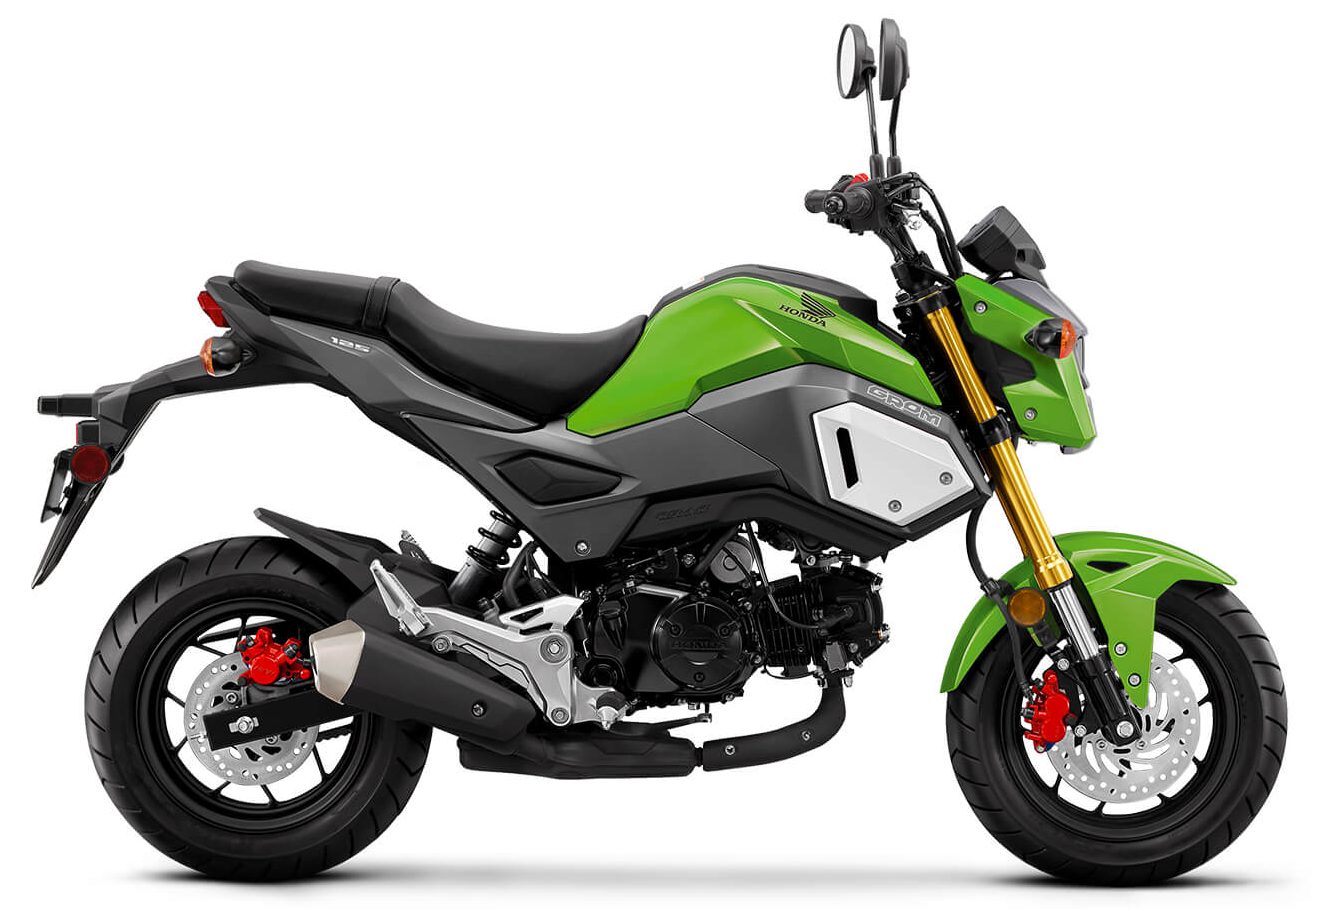 2020 Honda Grom 125 Officially Unveiled; India Launch Uncertain - right